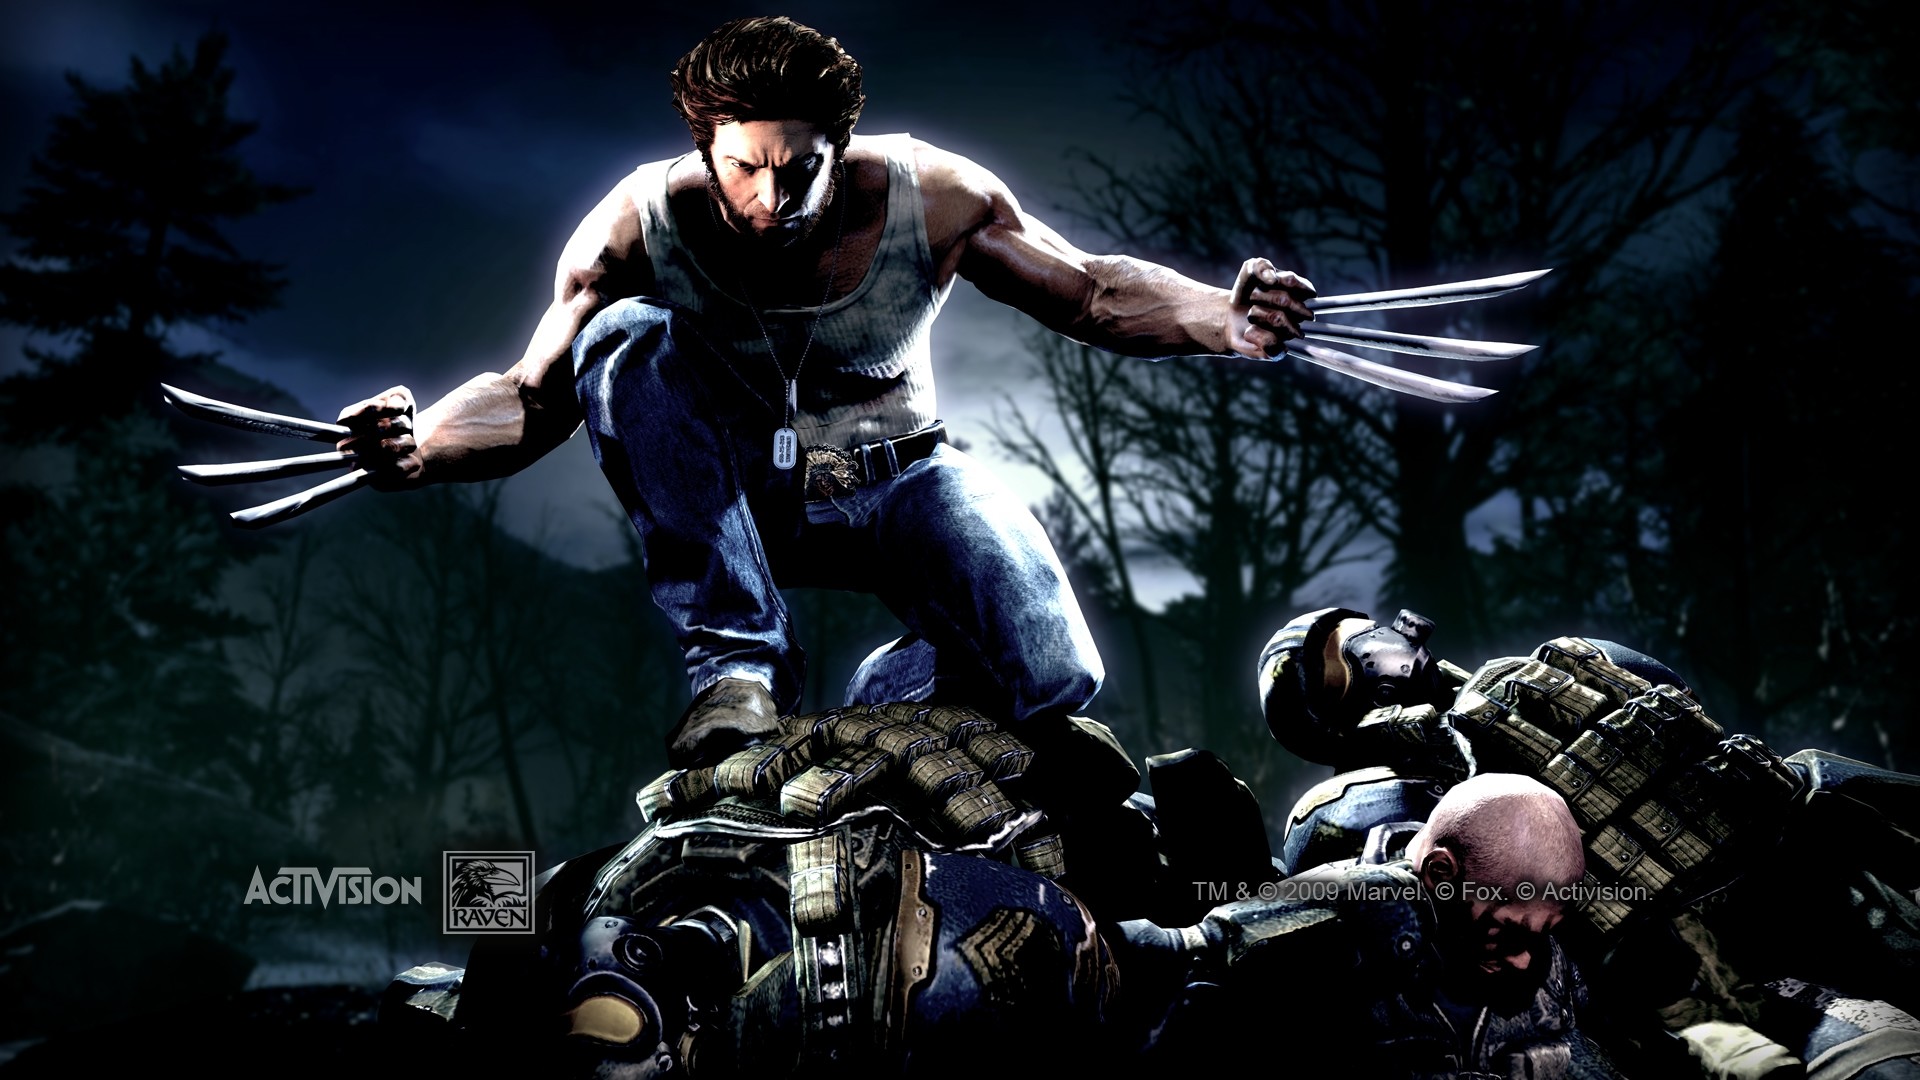 x men full hd wallpapers,action adventure game,fictional character,movie,pc game,action film